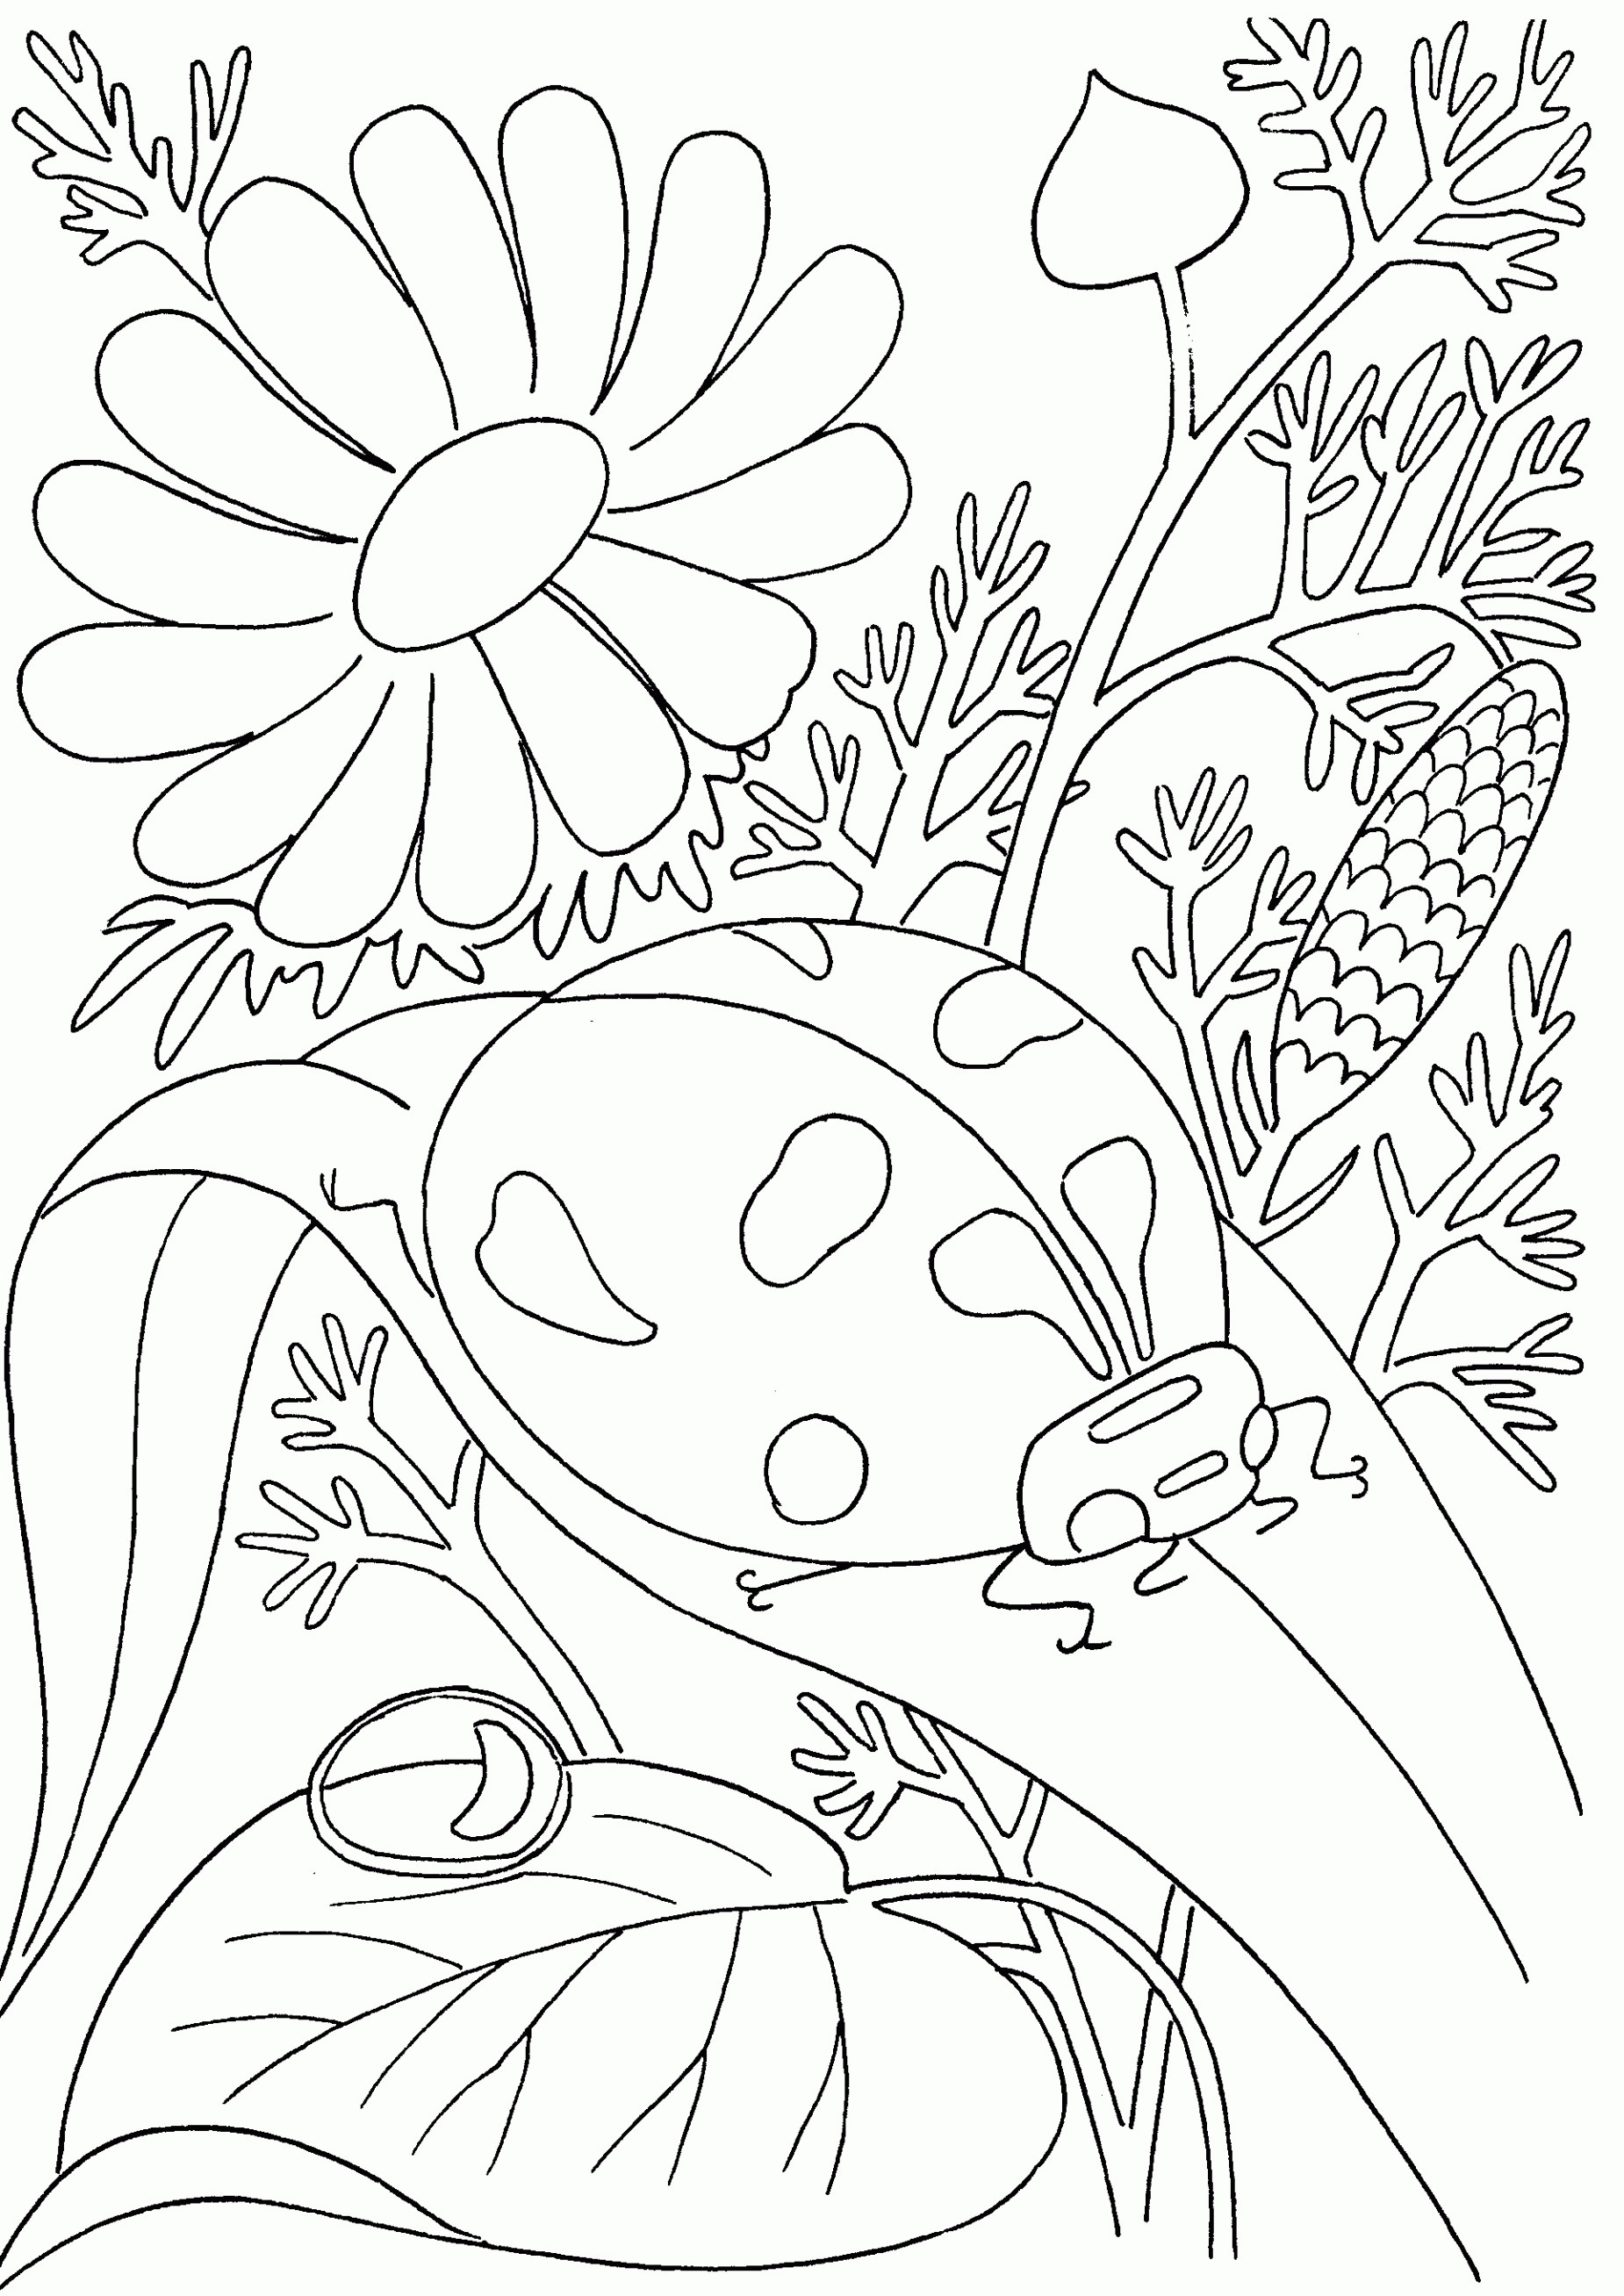 Bug Coloring Pages For Kids Bug Coloring Pages Topsailmultimedia